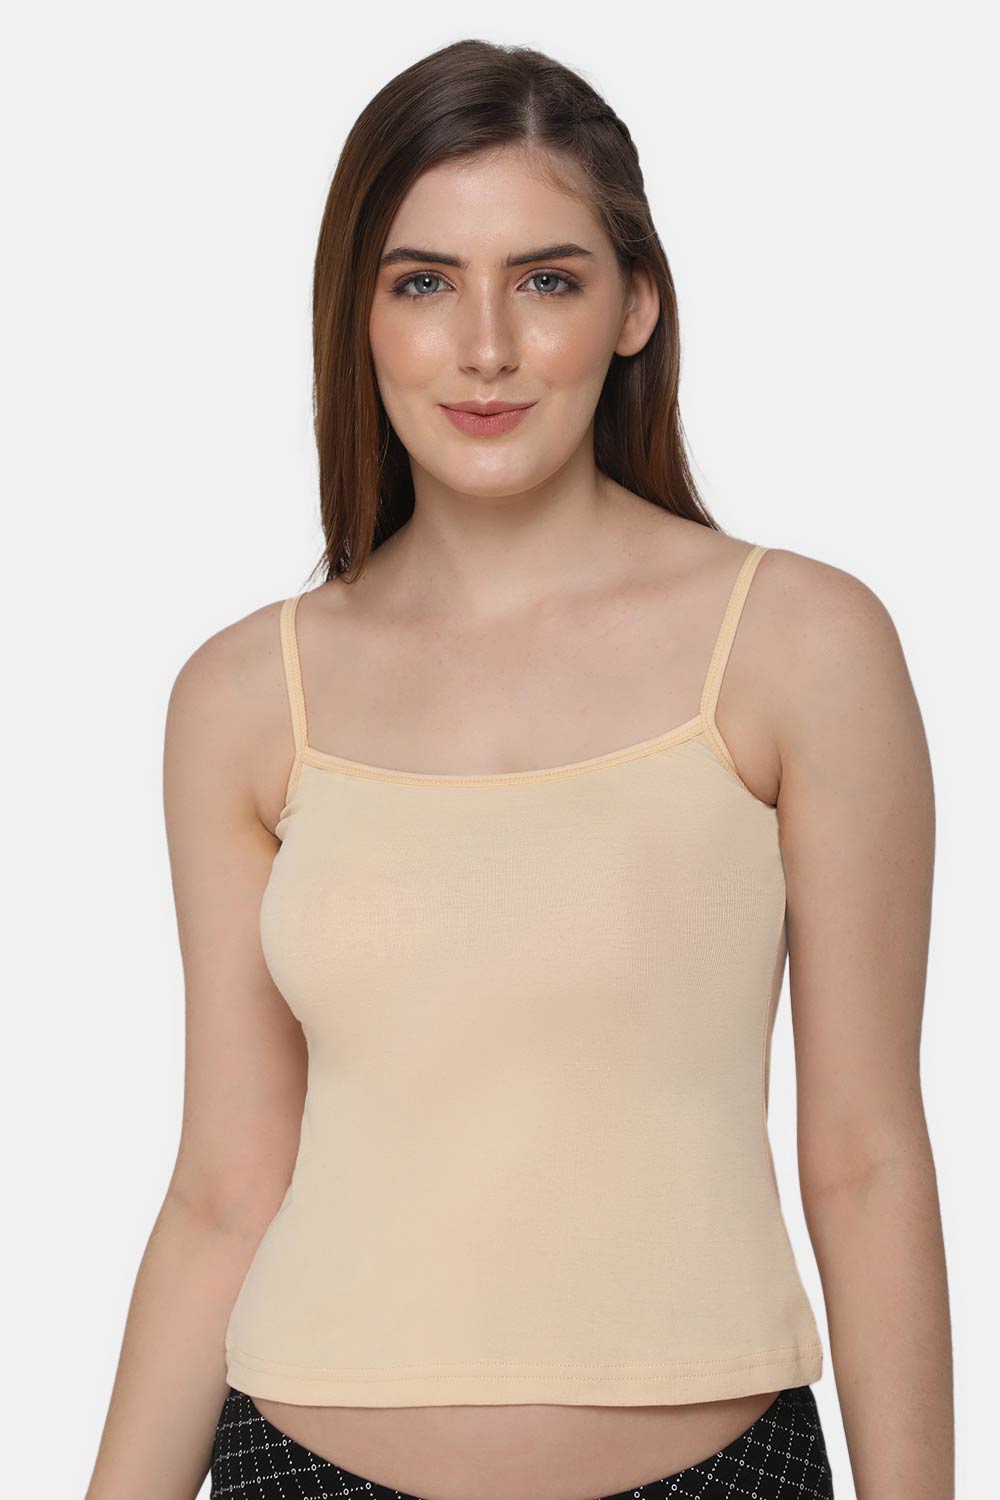 Intimacy Camisole-Slip Special Combo Pack - In02 - Pack of 3 - C34